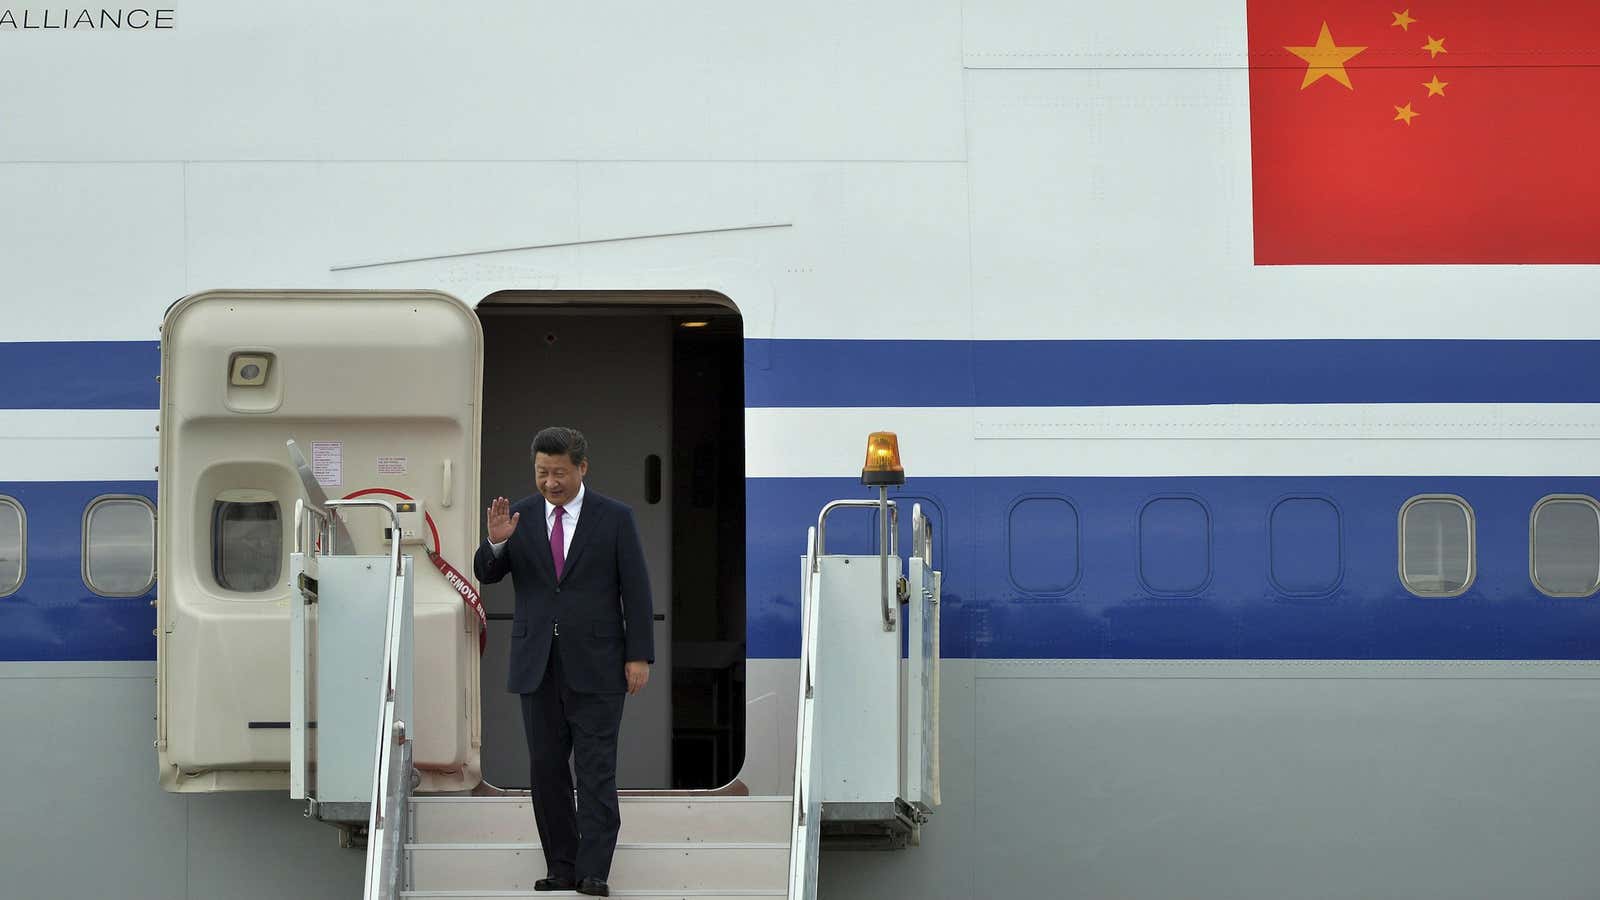 Chinese president Xi Jinping in Ufa, Russia, far and away from the market turmoil at home.